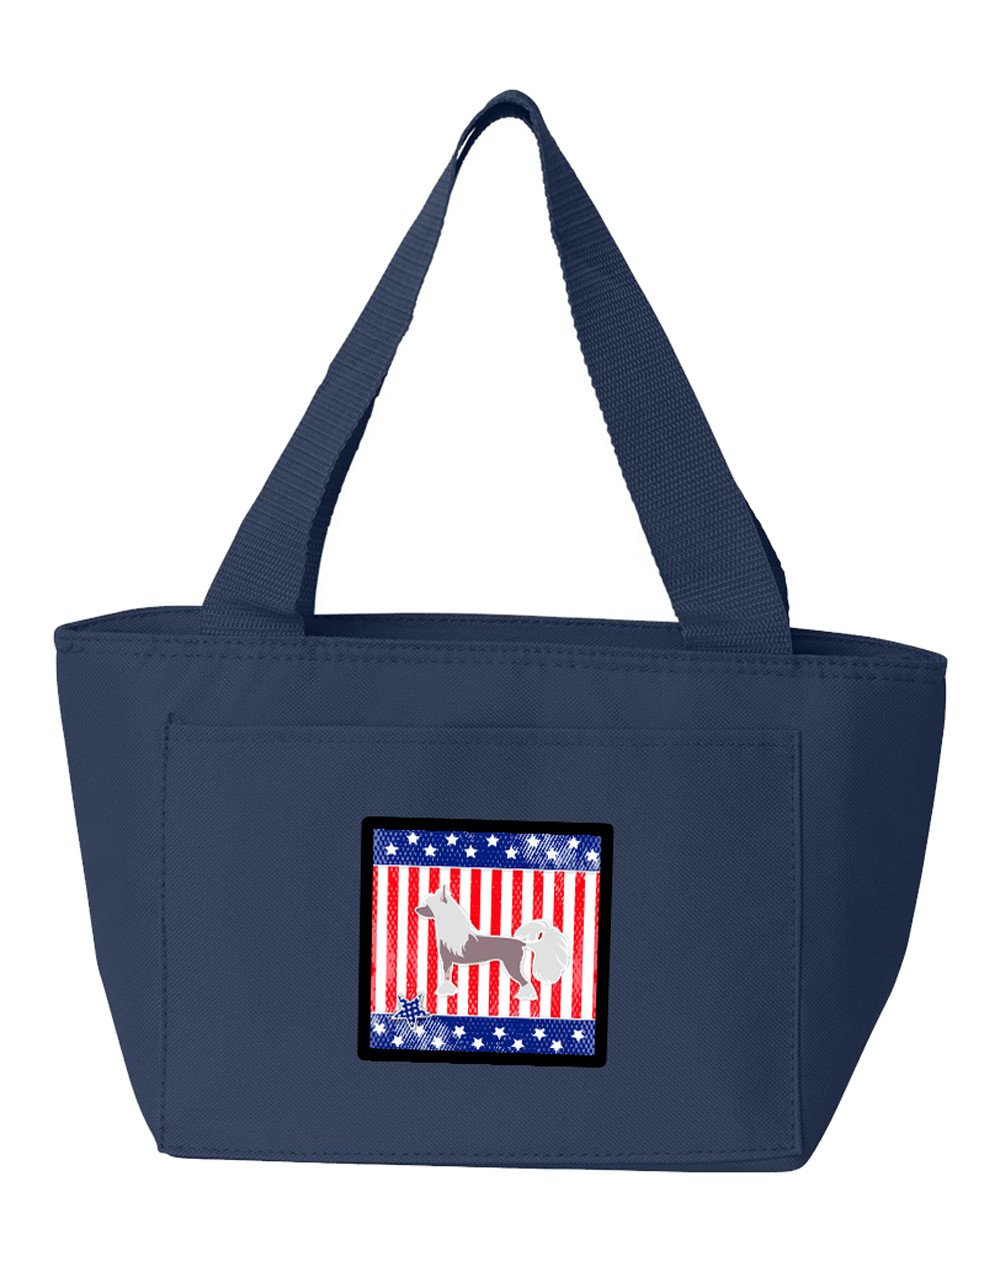 USA Patriotic Chinese Crested Lunch Bag BB3343NA-8808 by Caroline's Treasures